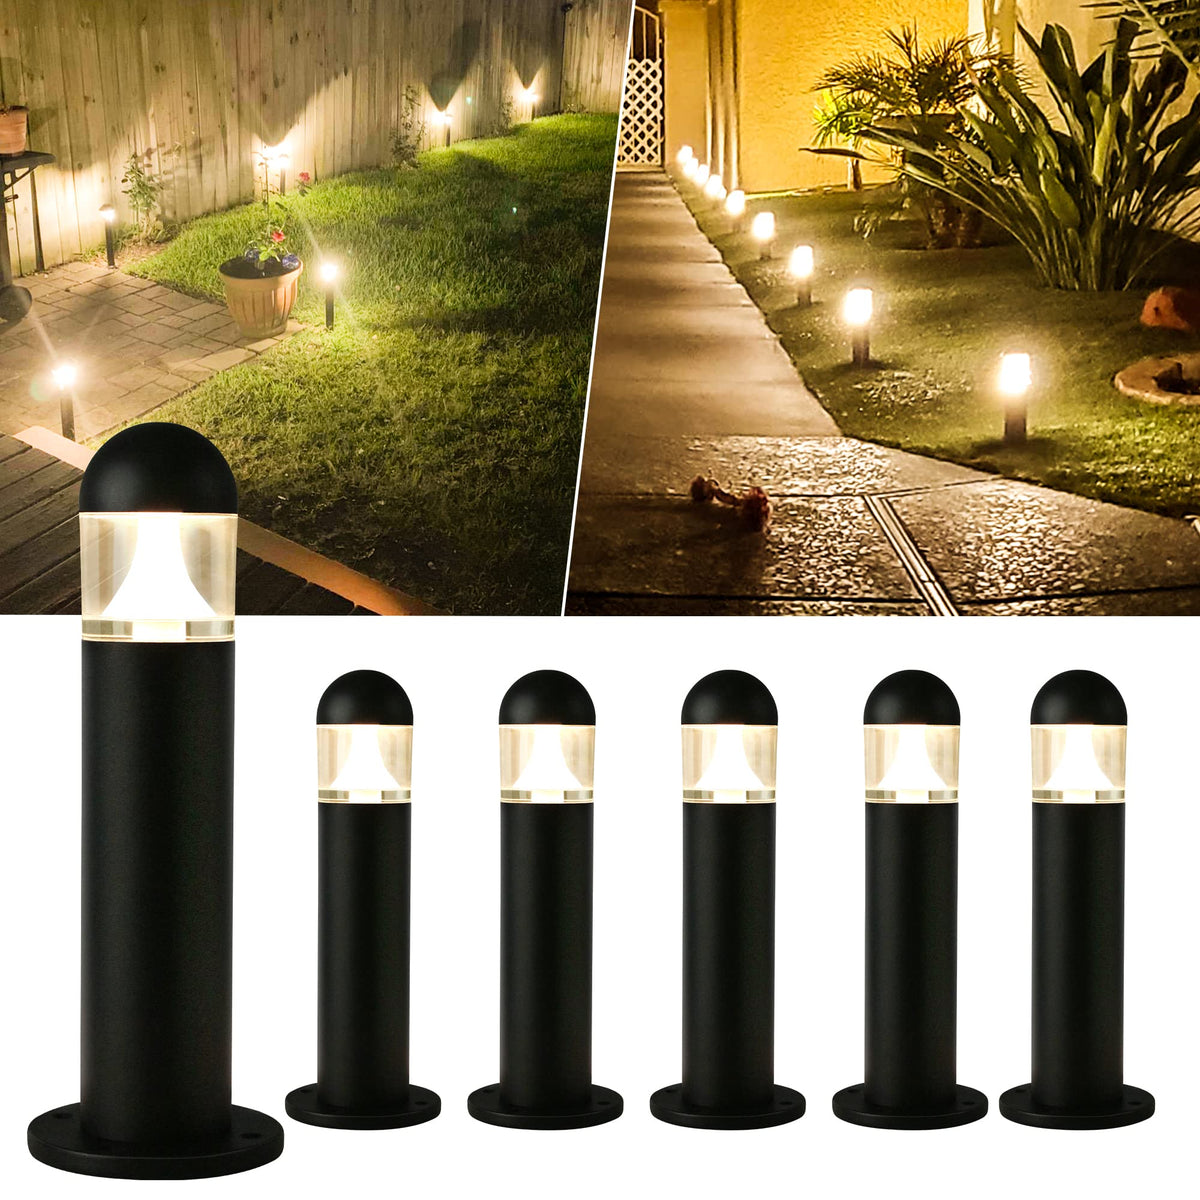 MOON-DE-AGE Low Voltage Landscape Pathway Lights, 12V LED Bollard Light  IP67 Waterproof, Outdoor Driveway Walkway Wired Lights (Inclusion Connector)